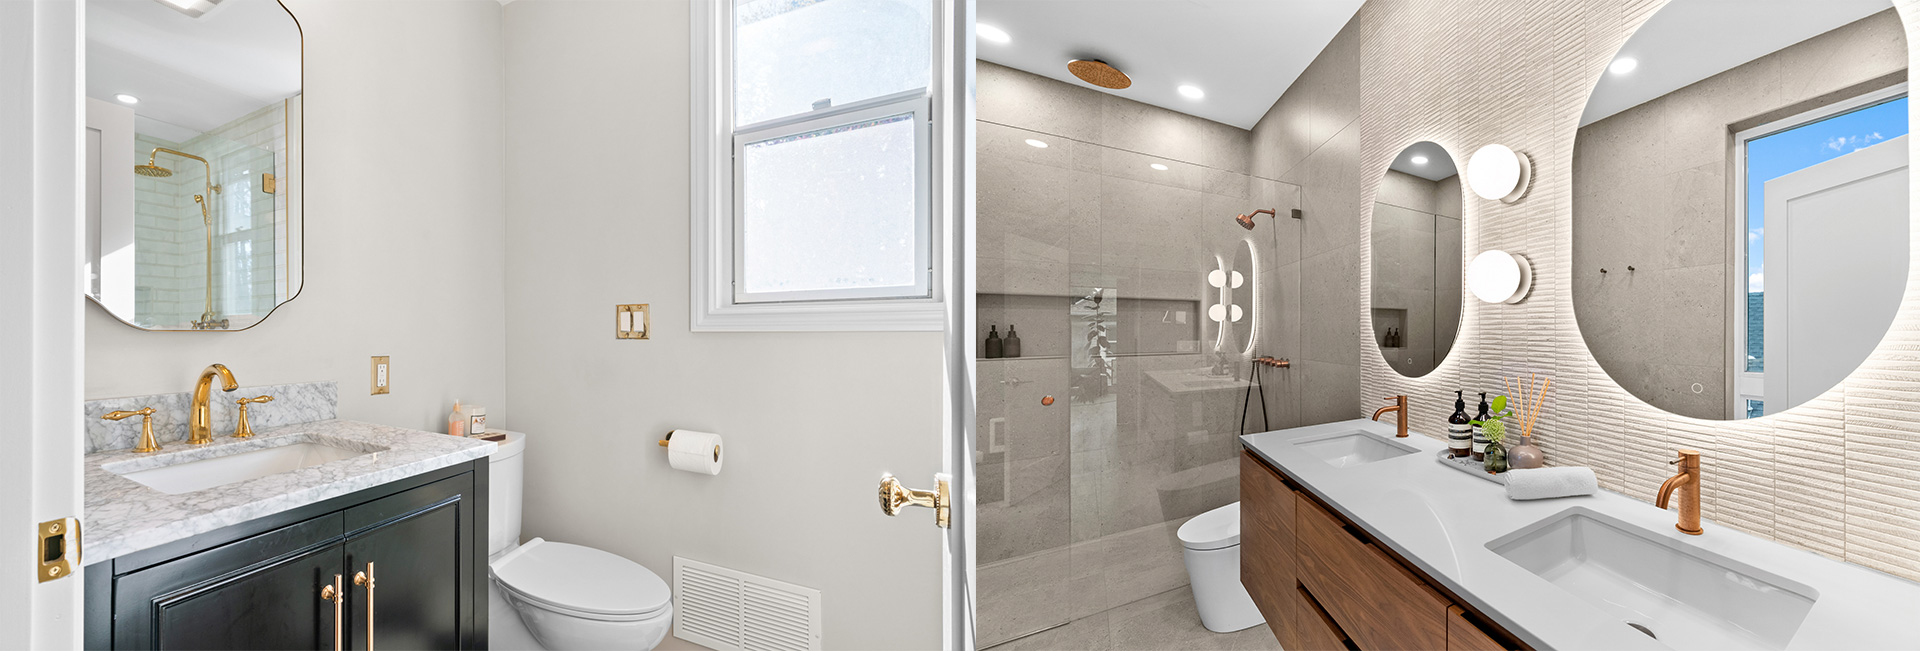 Tips on Choosing the Right Colors and Finishes for Your Bathroom Renovation Project